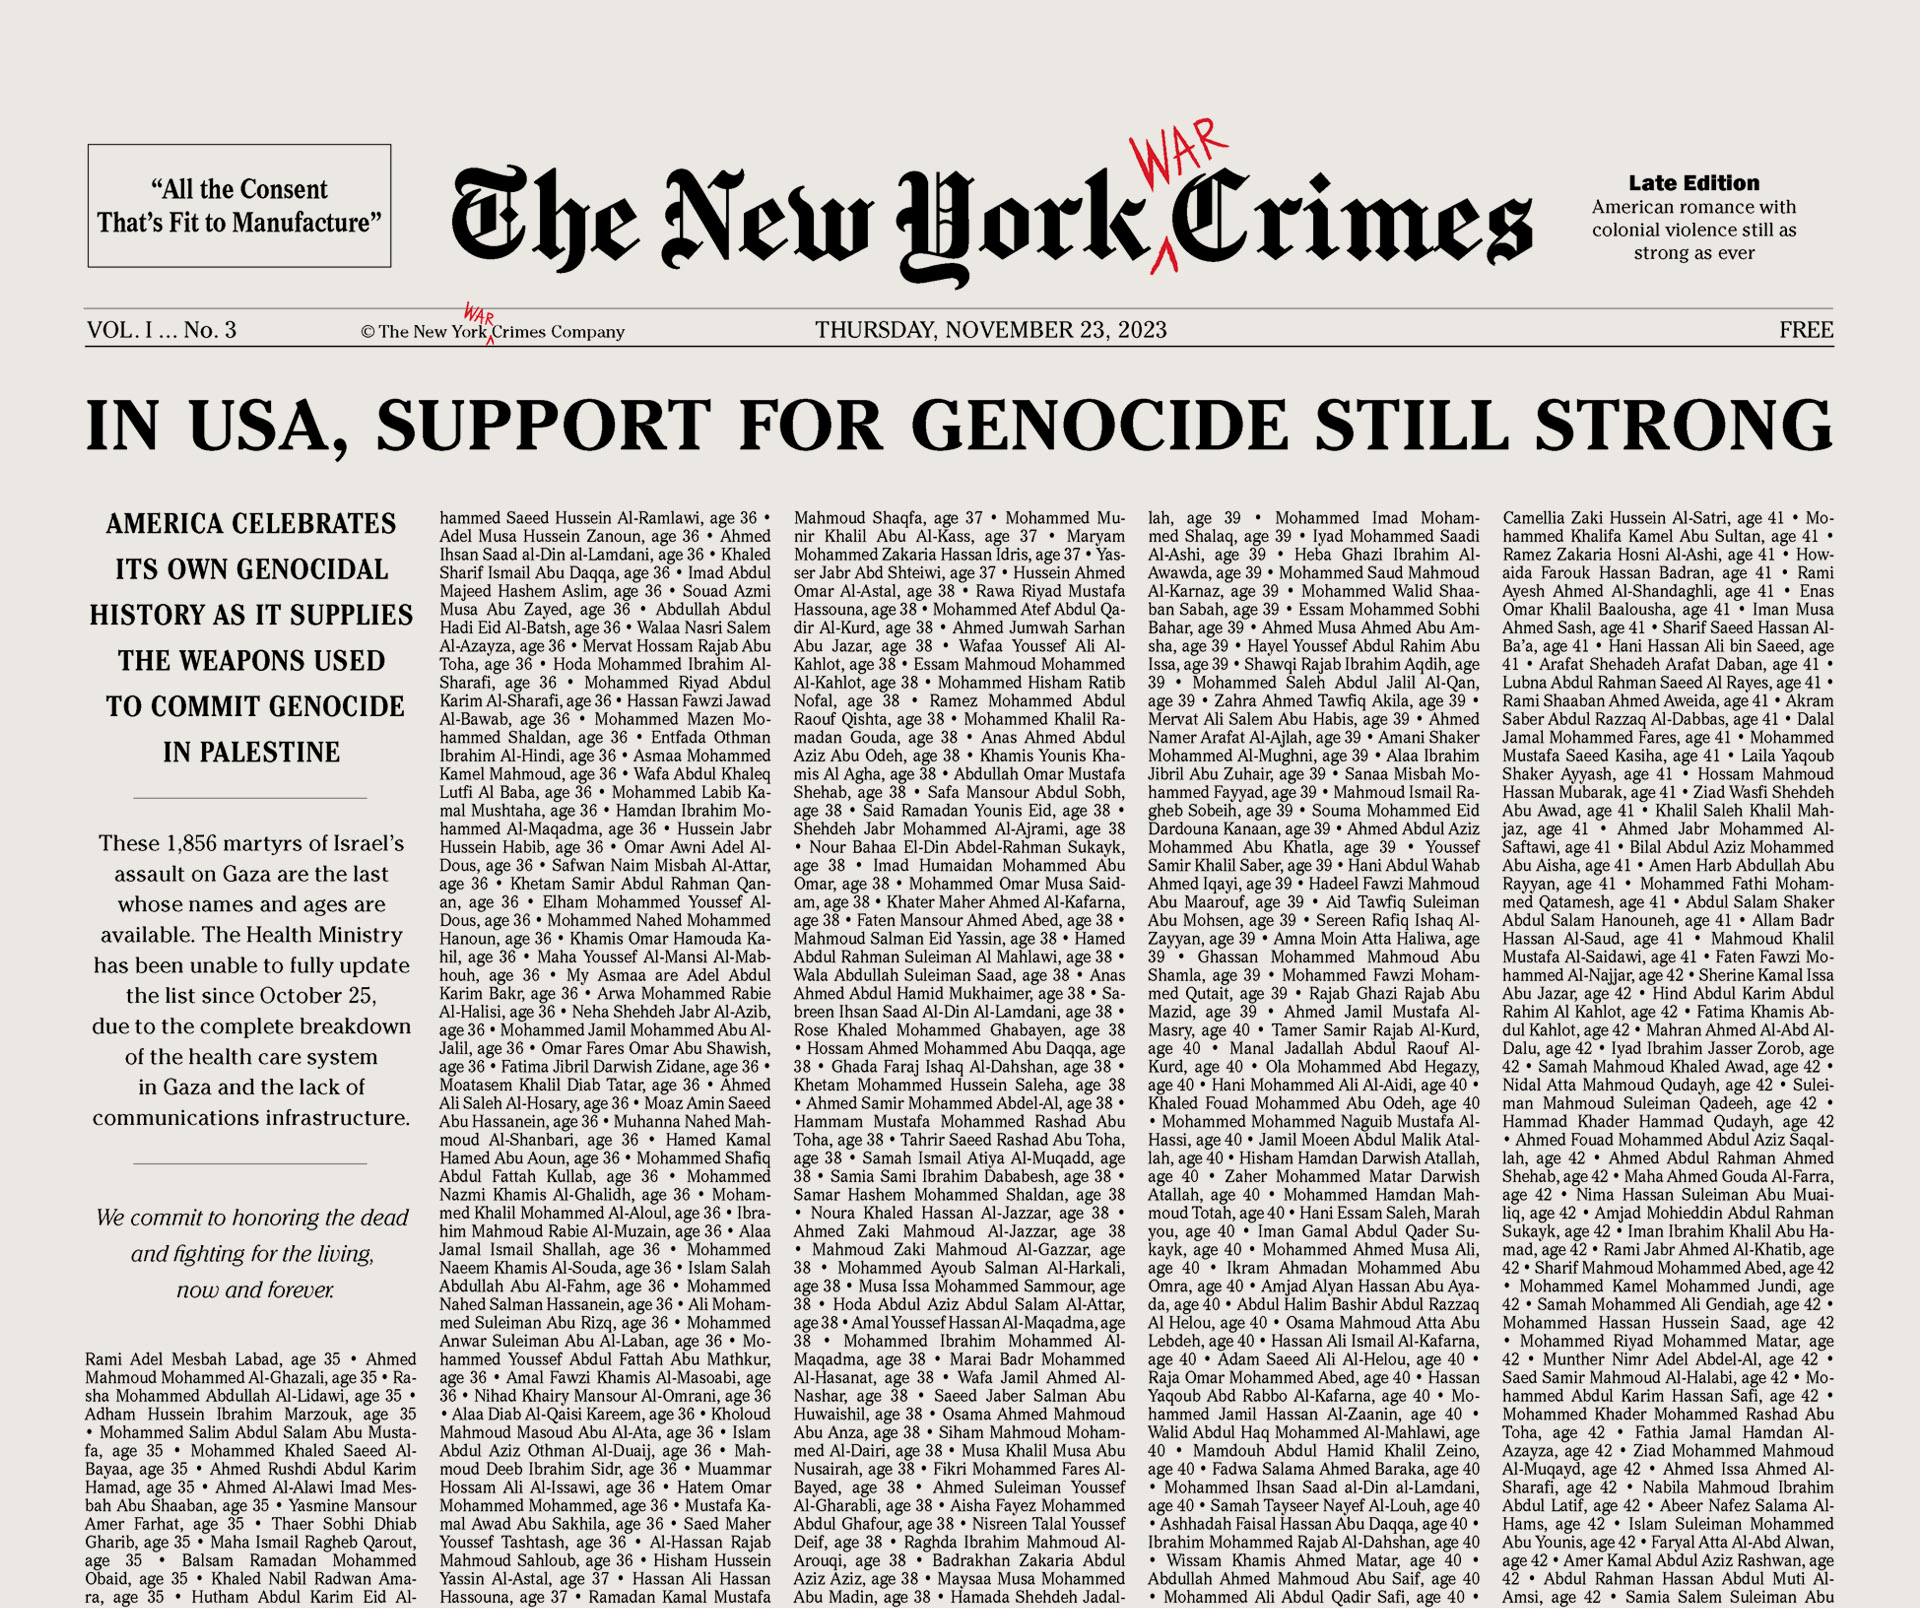 https://newyorkwarcrimes.com/media/pages/print-issue-vol-i-no-3-in-usa-support-for-genocide-is-still-strong/1ba4d1b85a-1709308050/ny-crimes-03-cover.jpg